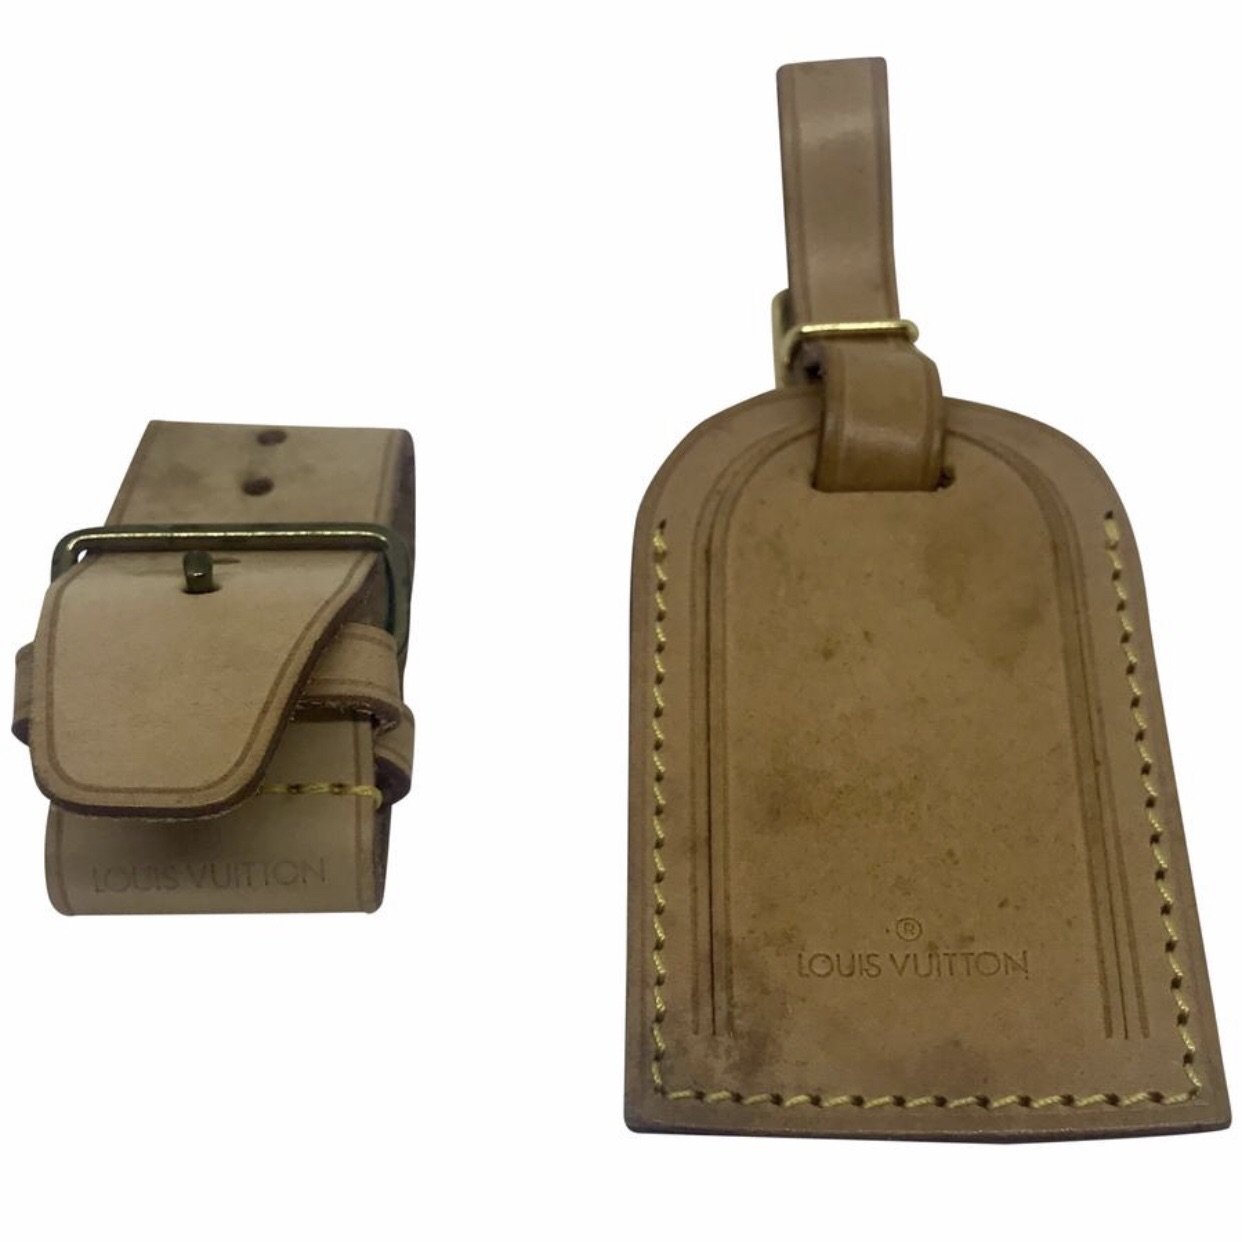 Louis Vuitton Luggage Tag - Authenticity Guaranteed – Just